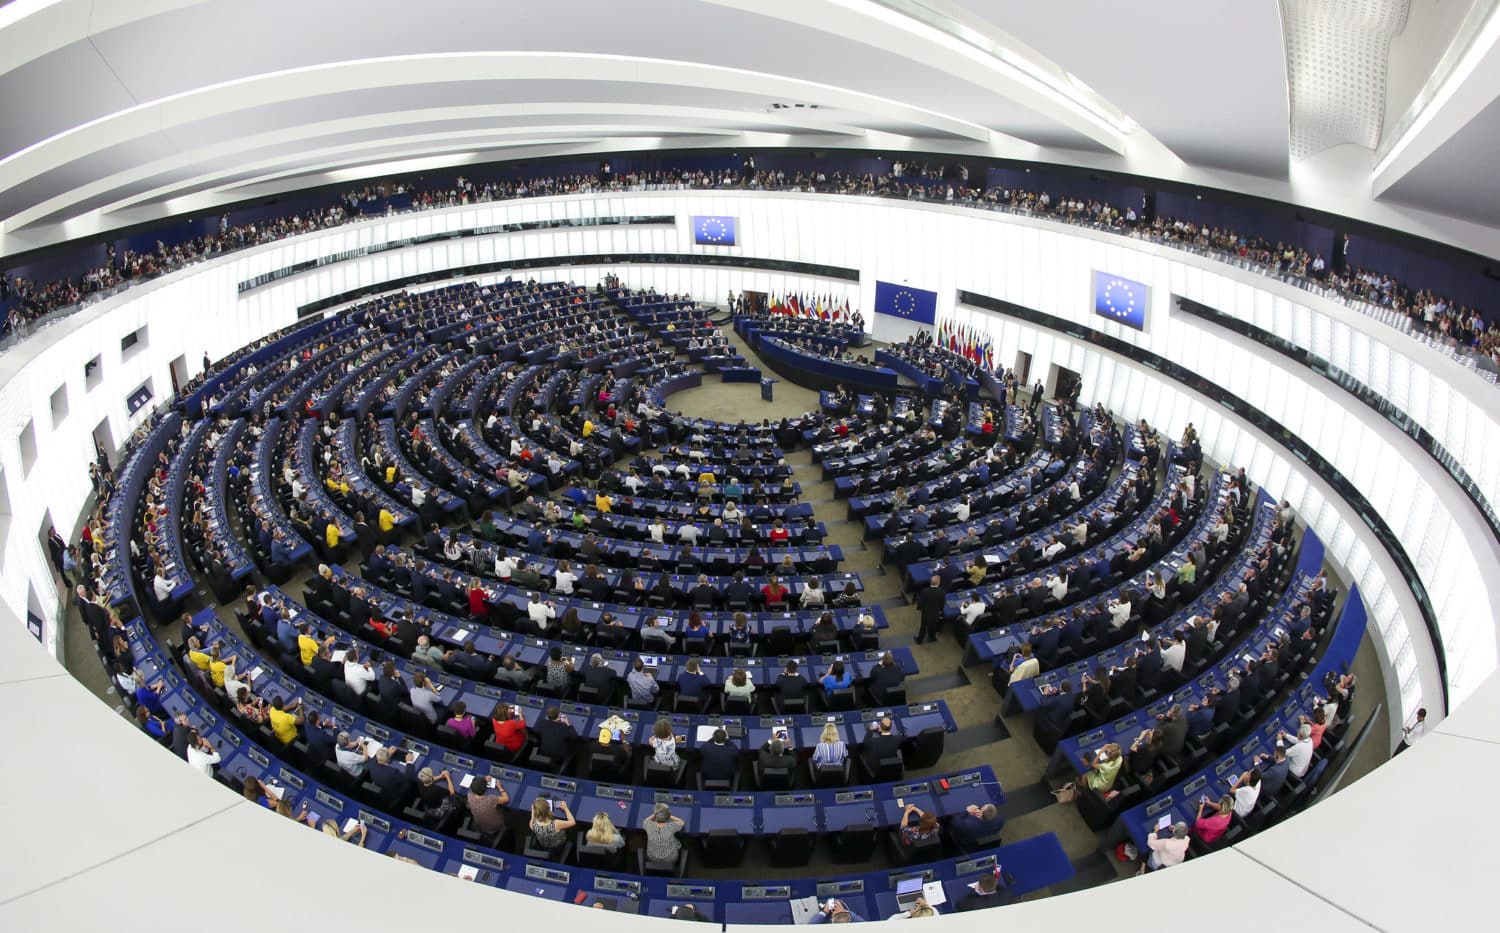 European Parliament chamber from above